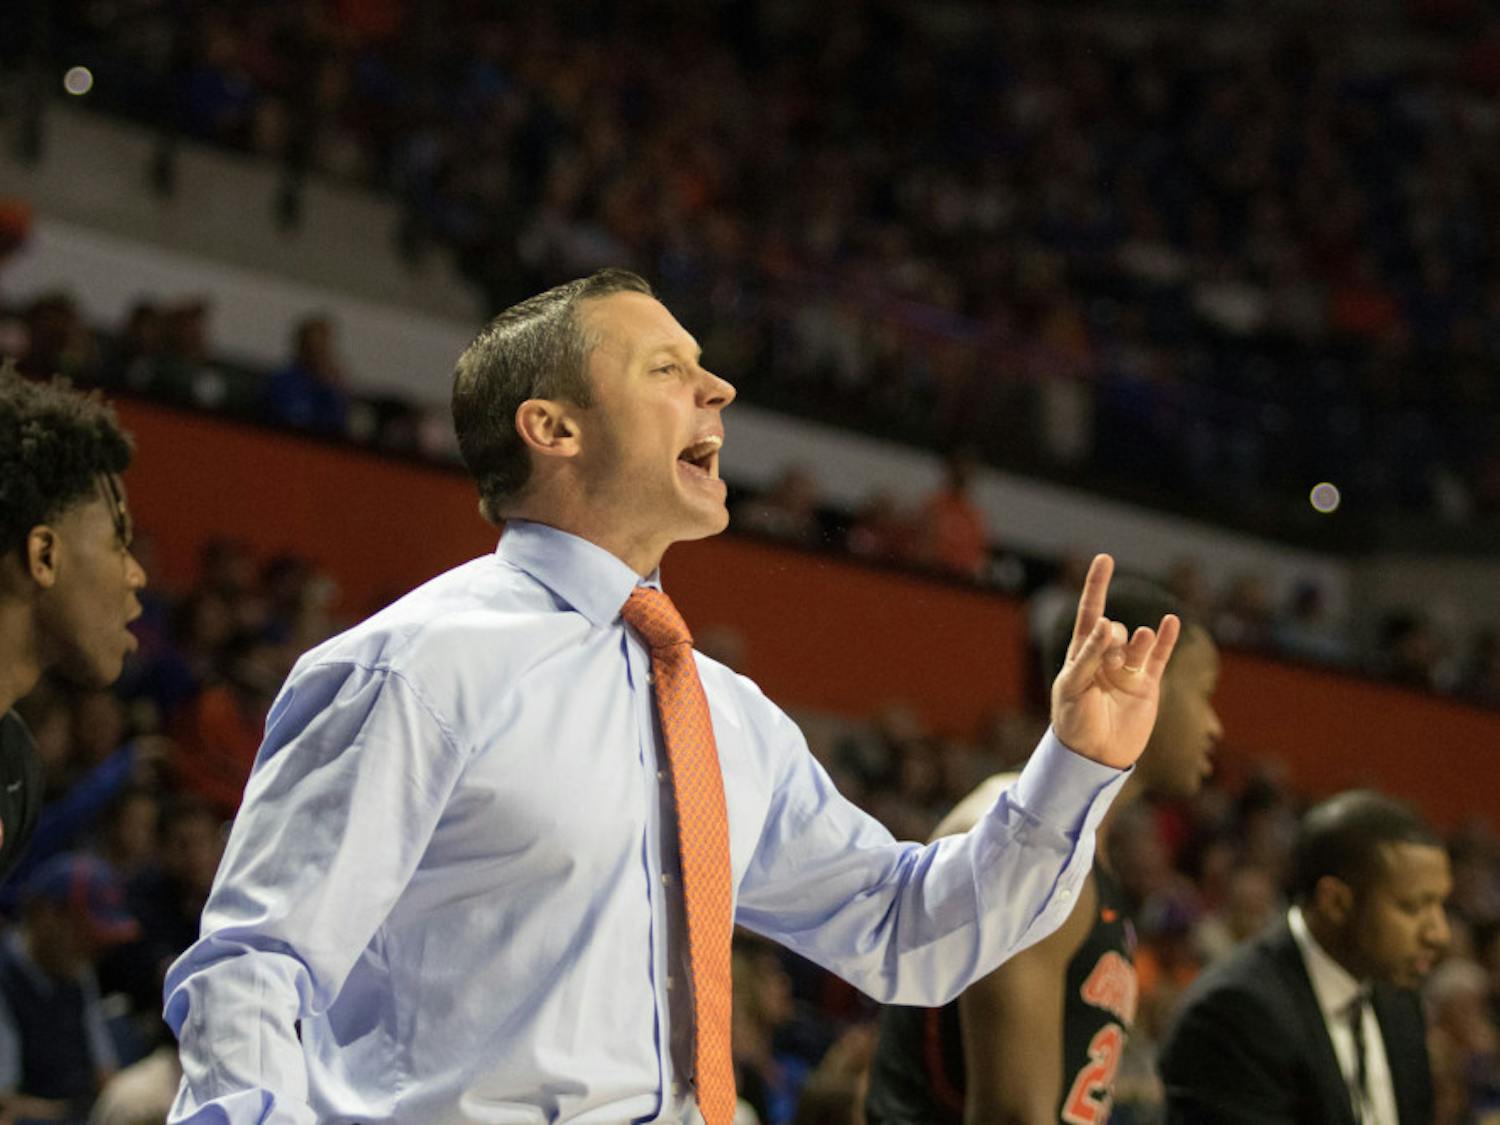 Florida men's basketball coach Mike White isn't satisfied with his team's defense despite it holding South Carolina to a season-low 41 points on Saturday. “I don’t want to act like this is a new season and we’ve got it all all figured out," he said.